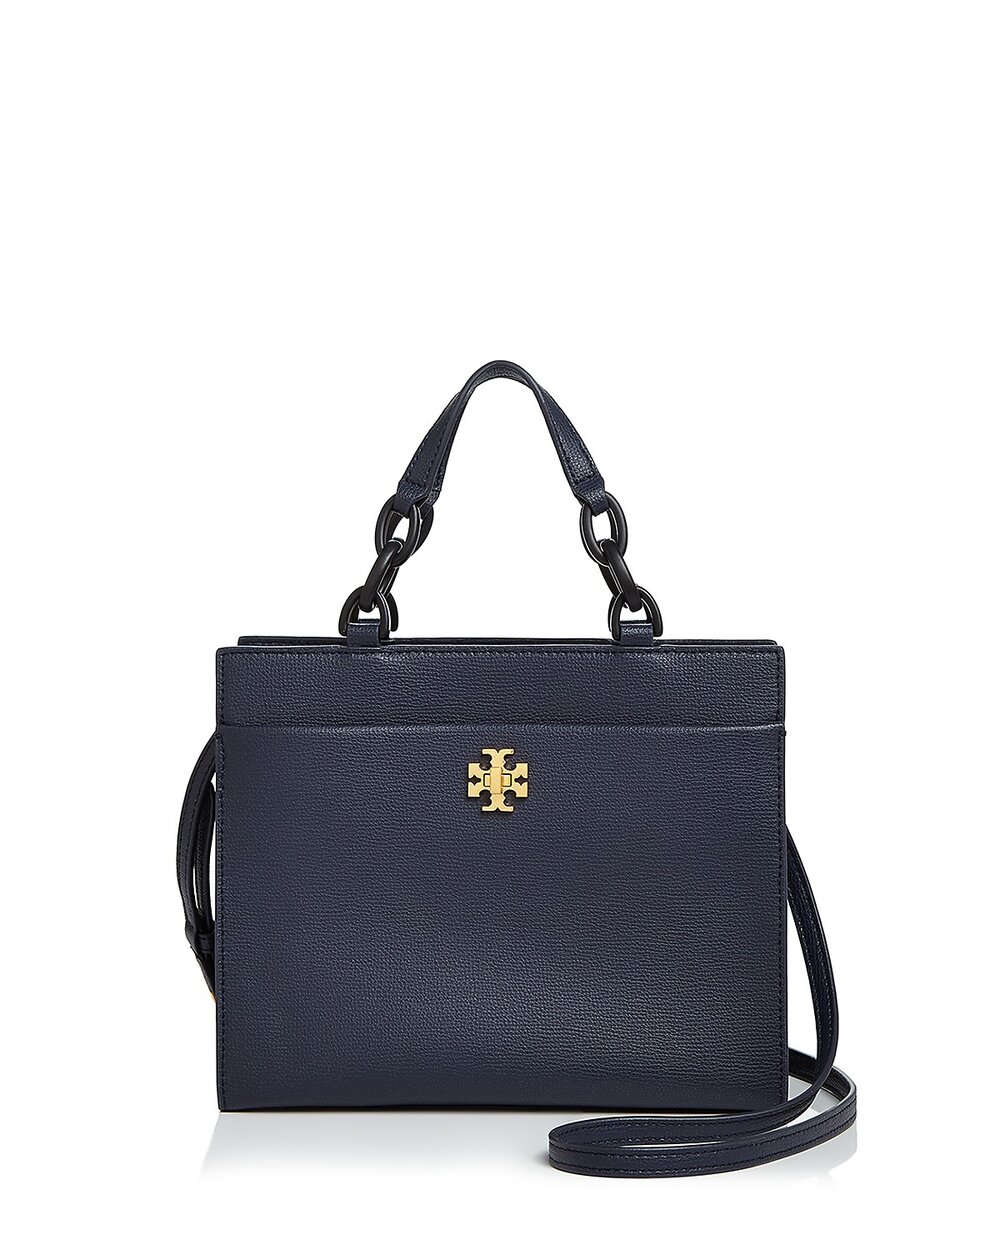 Tory Burch Kira Small Leather Tote — UFO No More